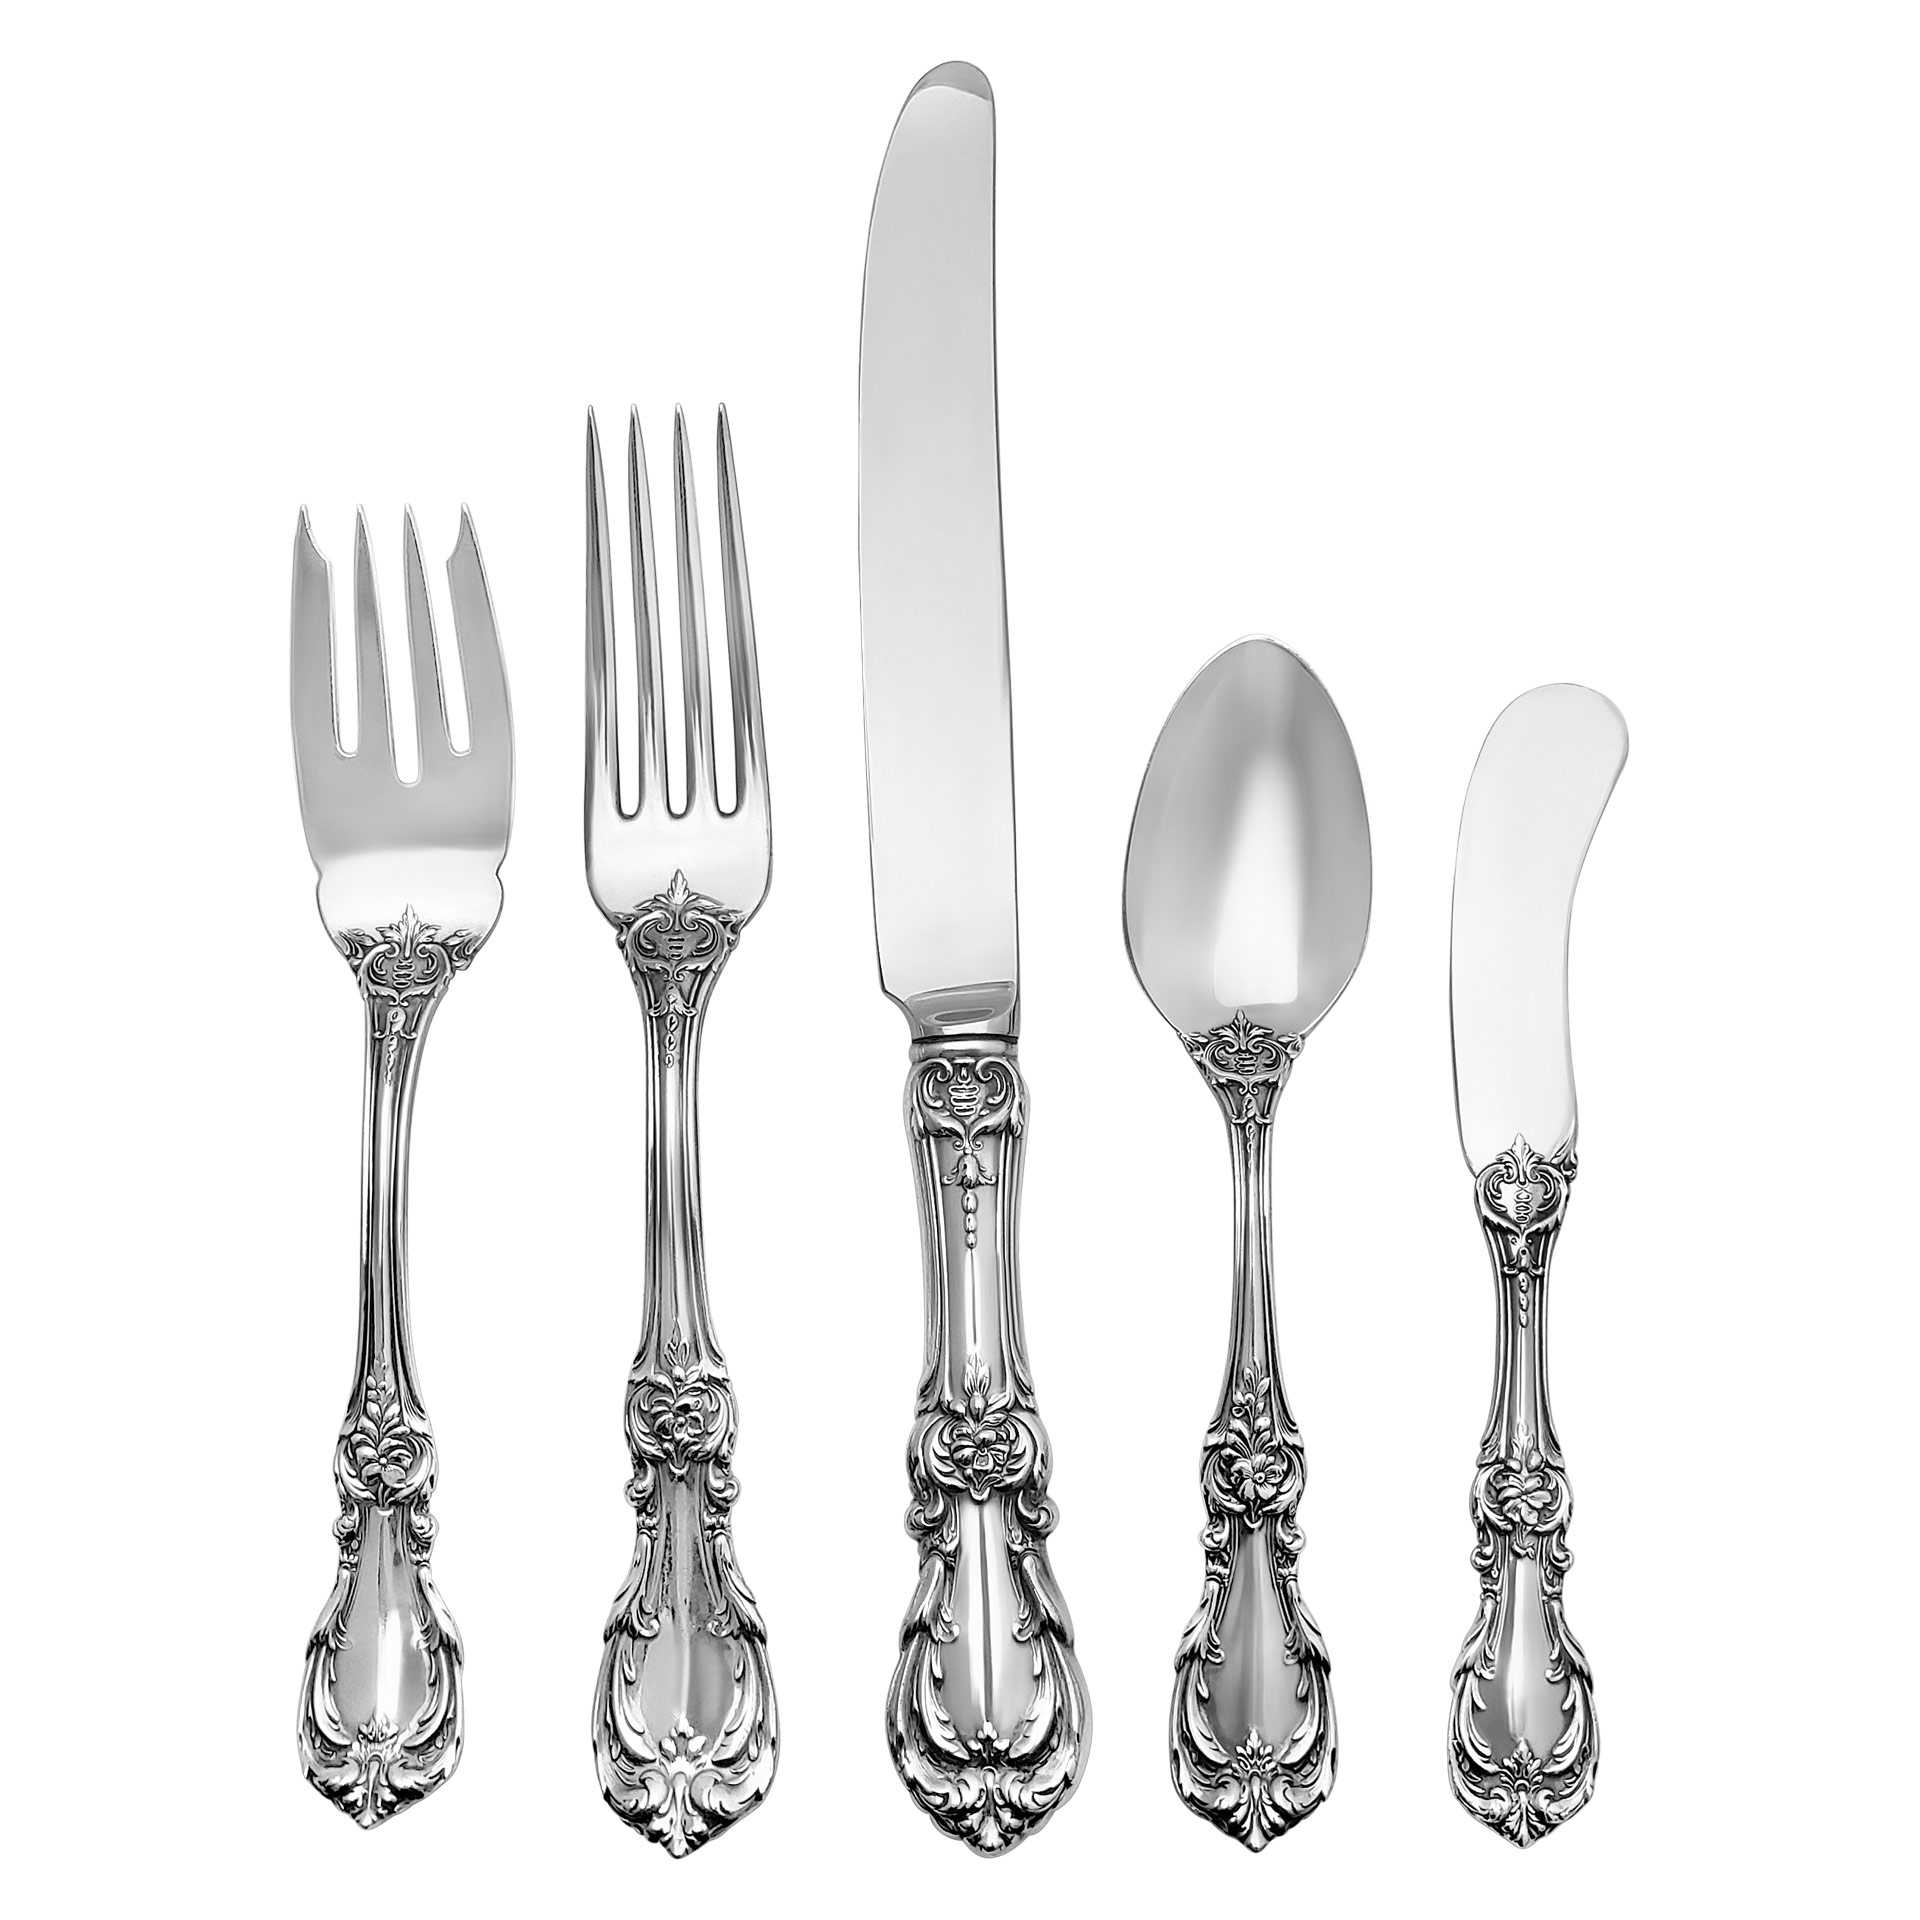 "BURGUNDY" sterling silver flatware set, ptd in 1949 by Reed & Barton- 95 pieces total-